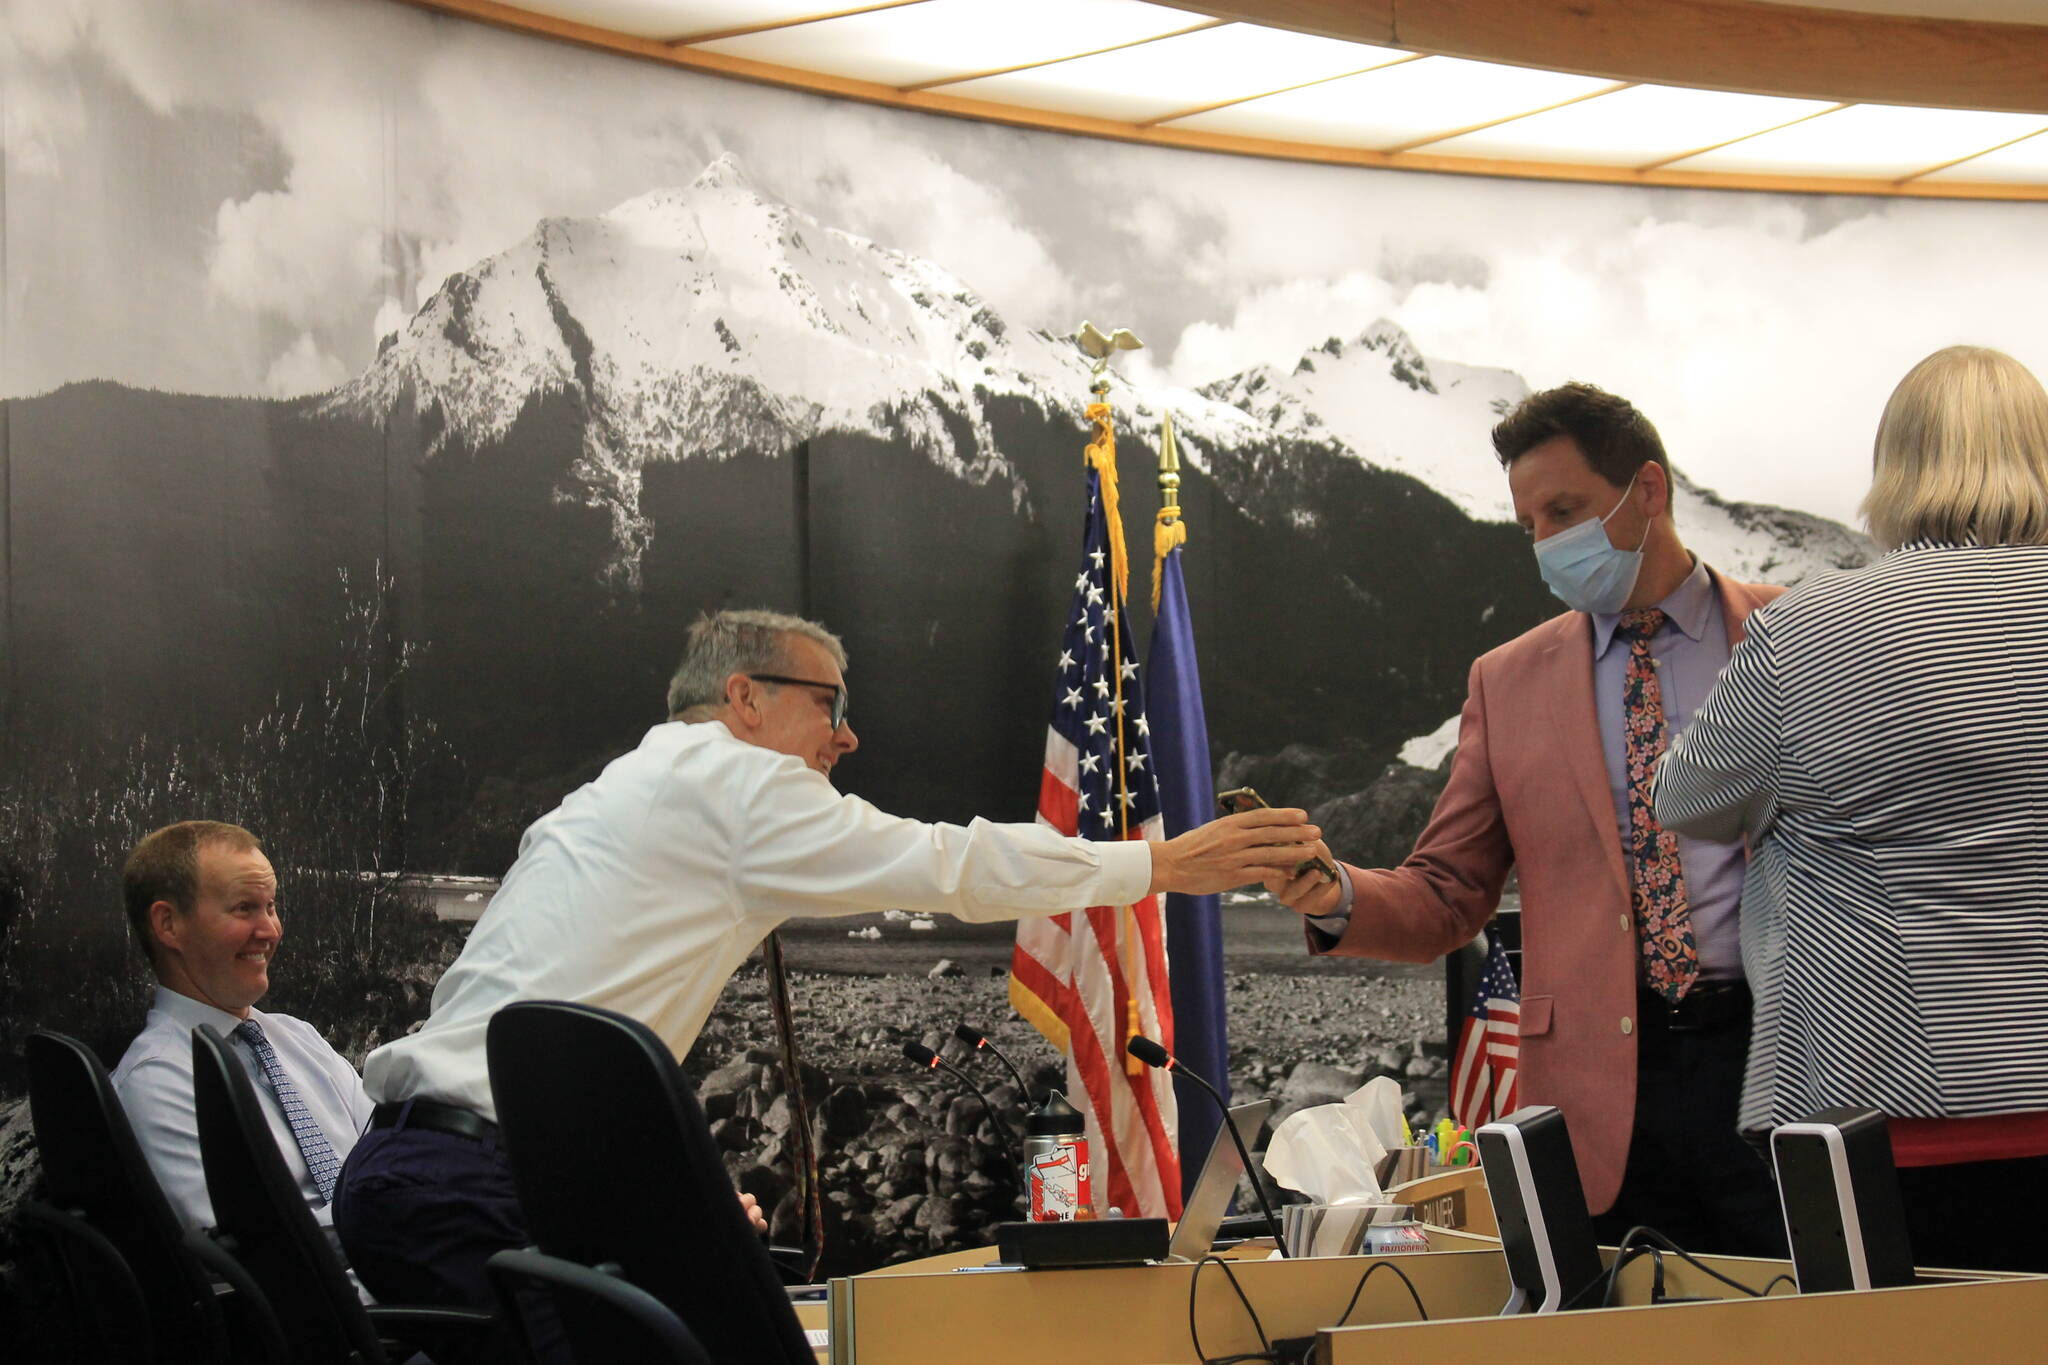 City Manager Rorie Watt chats with member of the Assembly during a break in Monday night’s meeting. (Clarise Larson/ Juneau Empire)